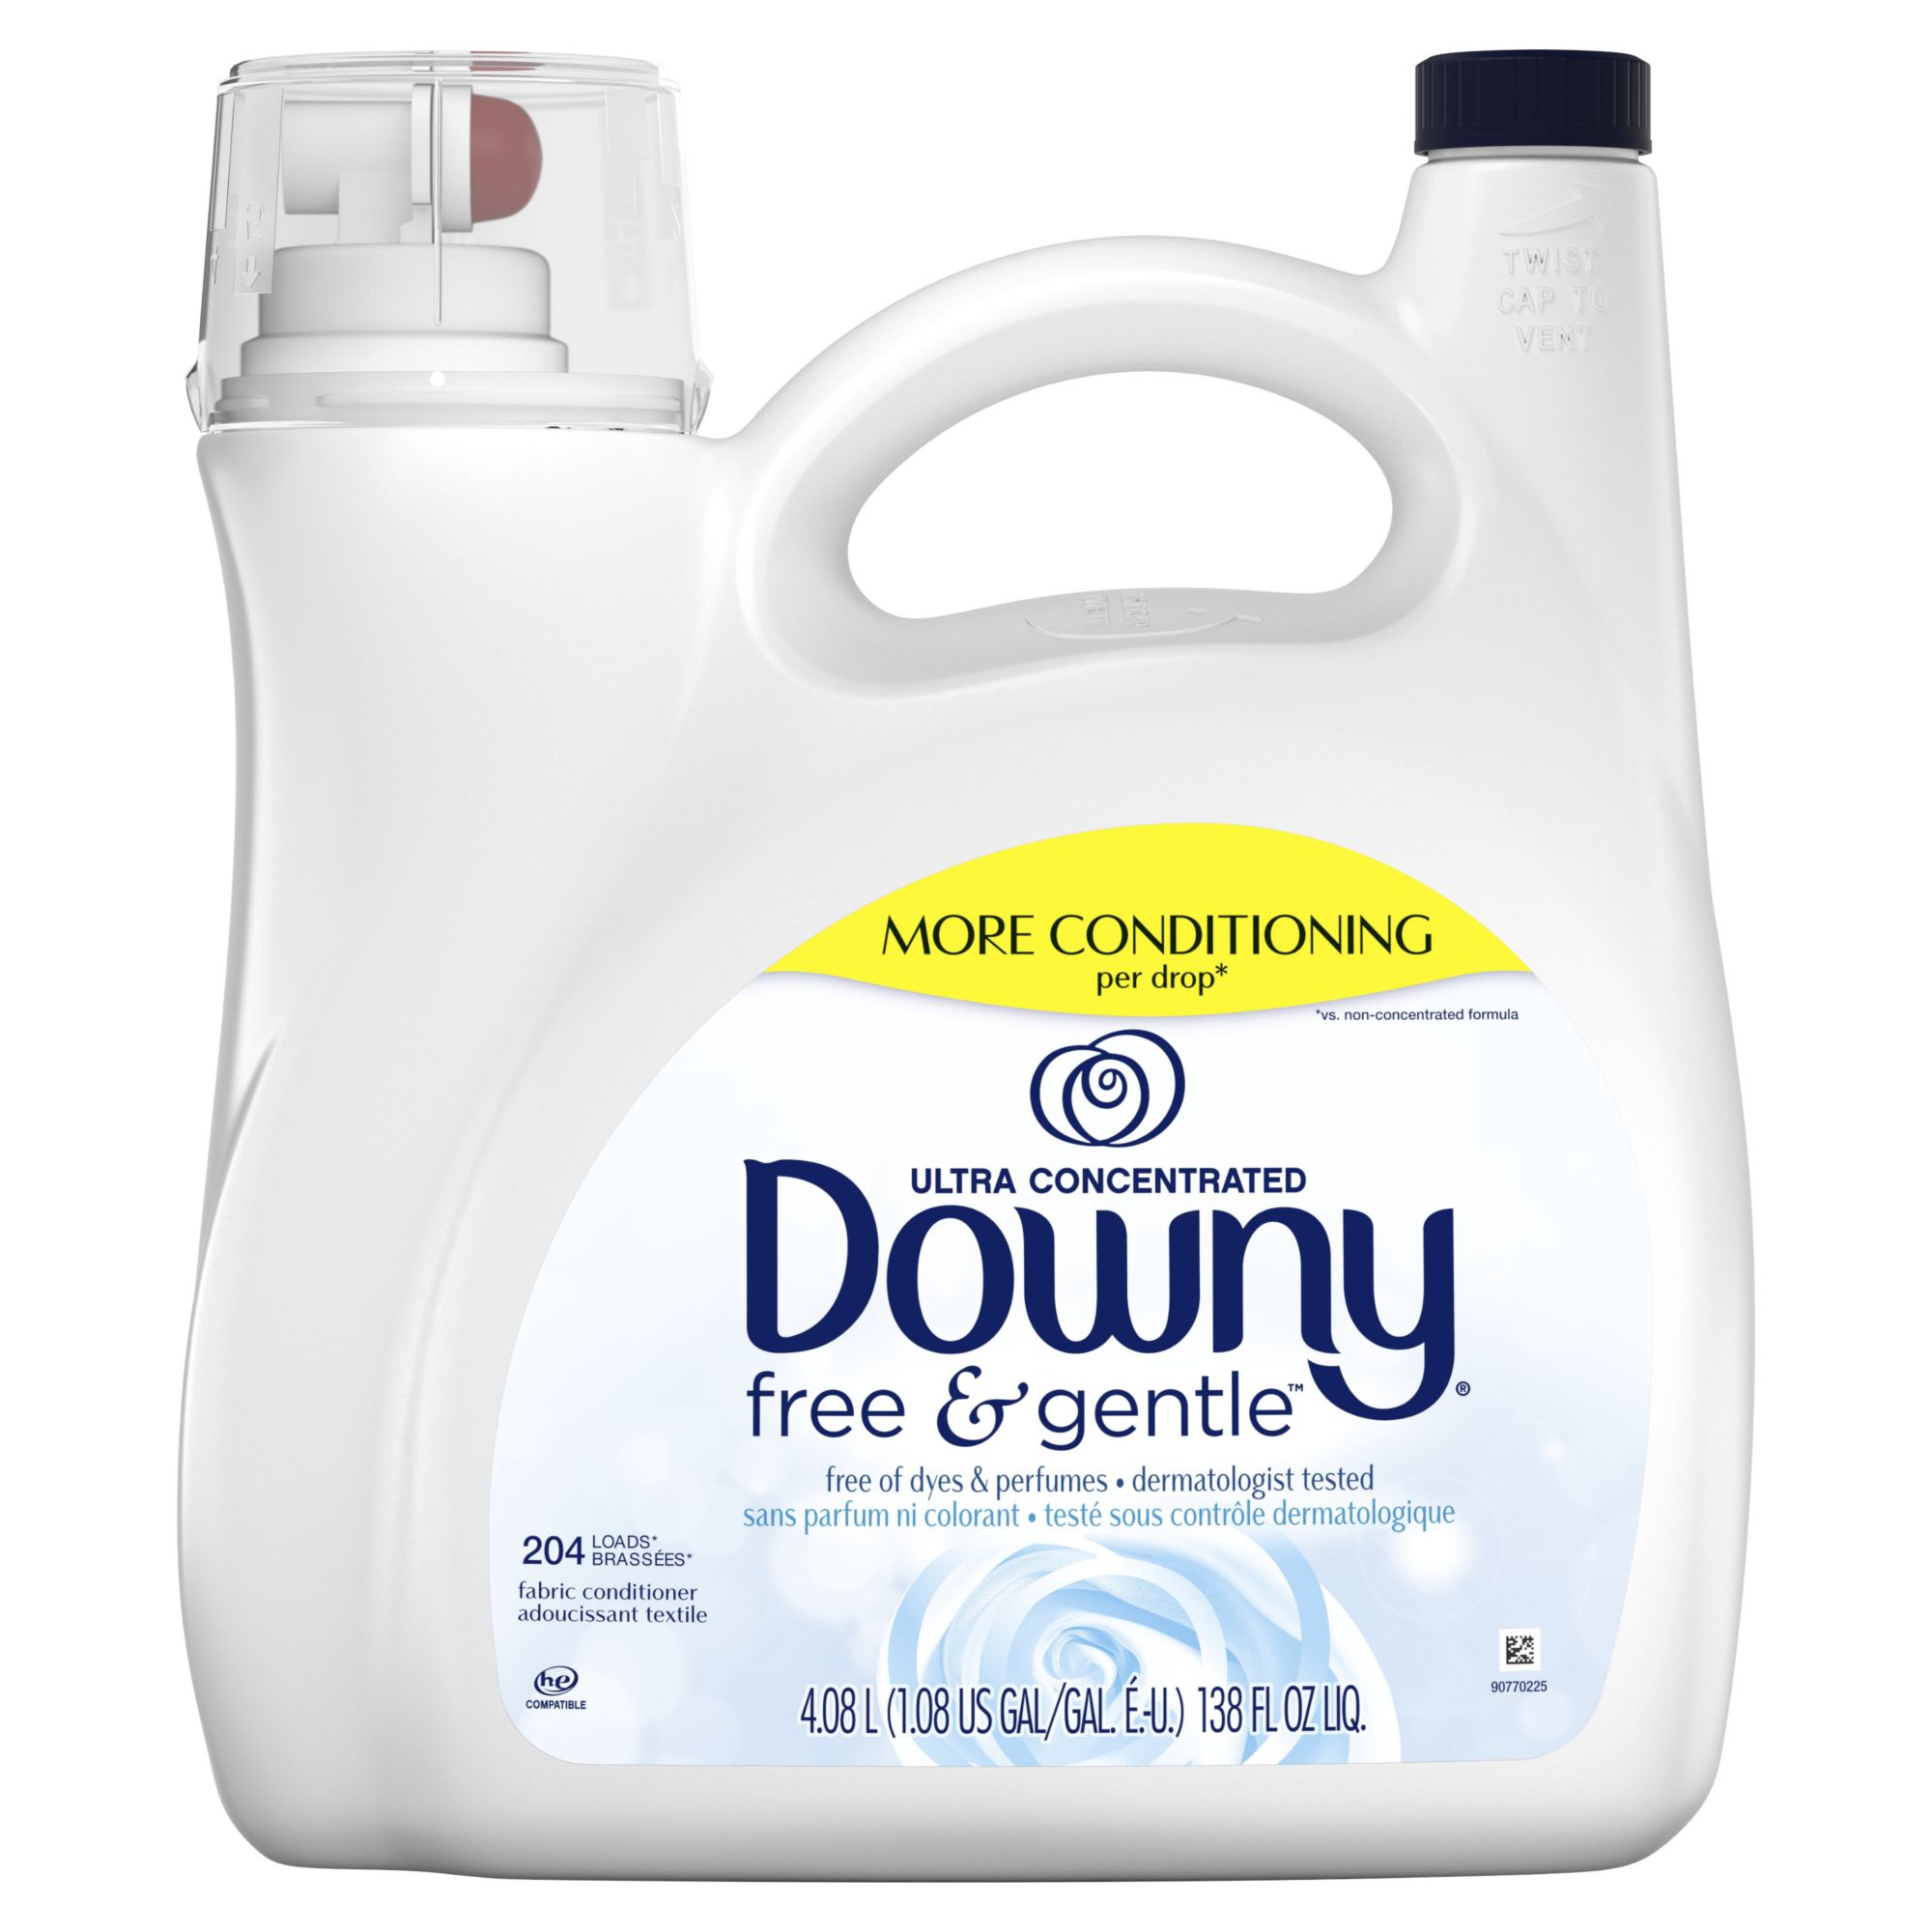 Downy Rinse Cool Cotton Fabric Softener - 25.5 Fl Oz : Target